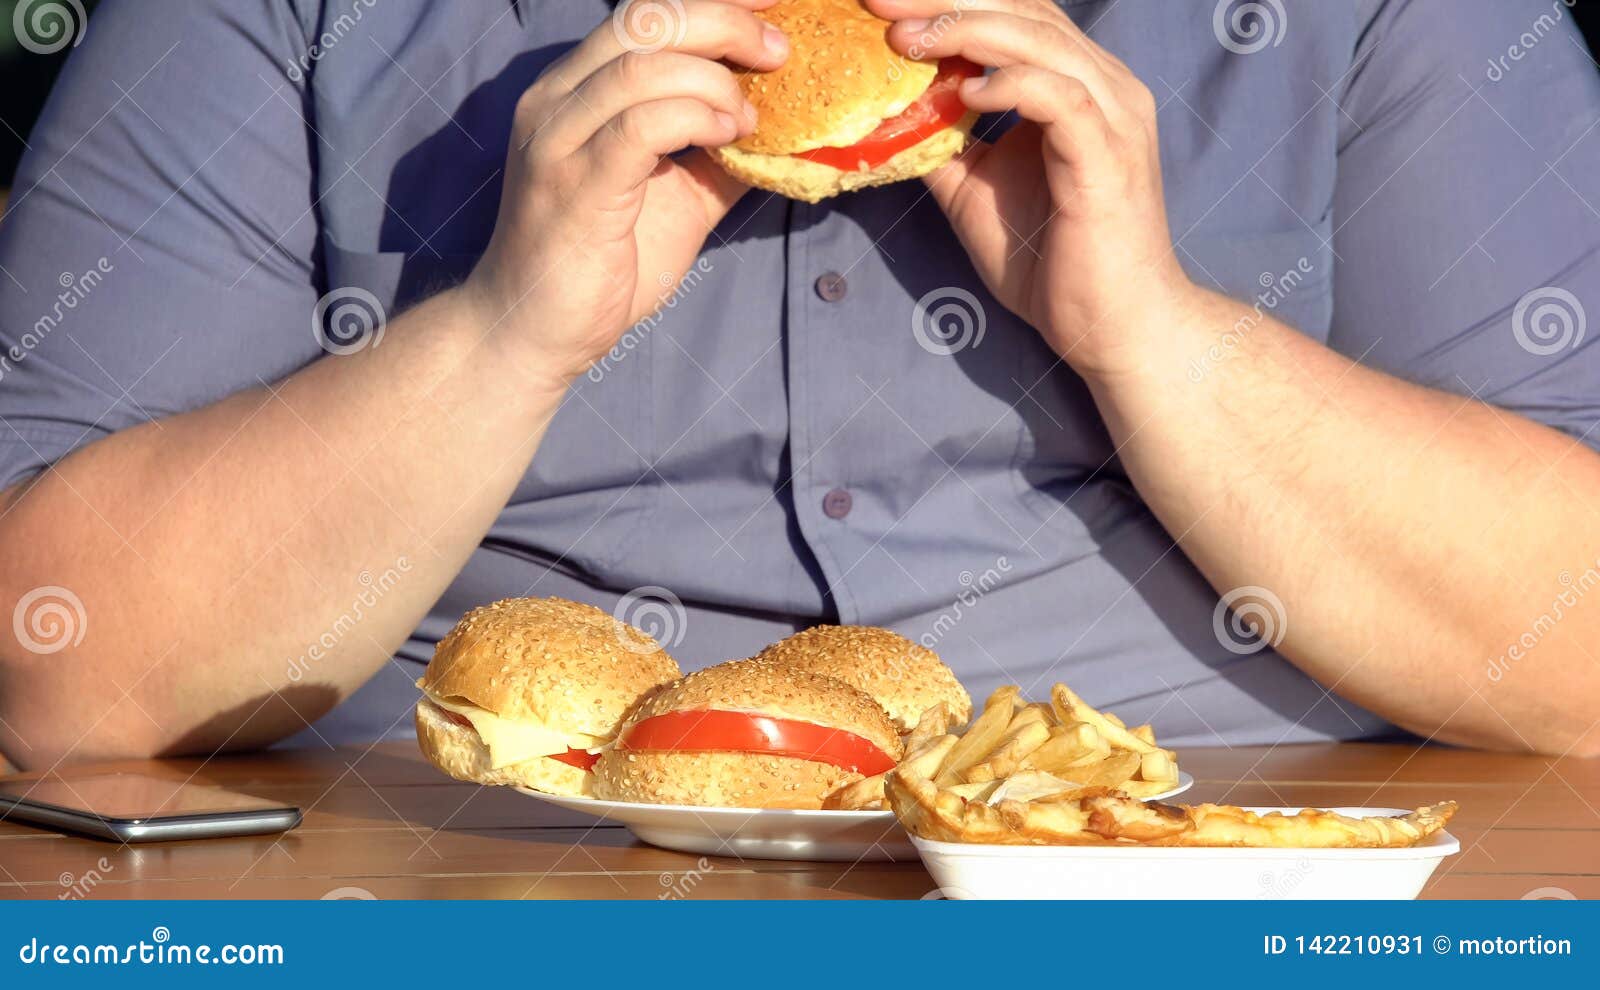 unhealthy food addiction, obese hungry man eating fatty burgers, overweight